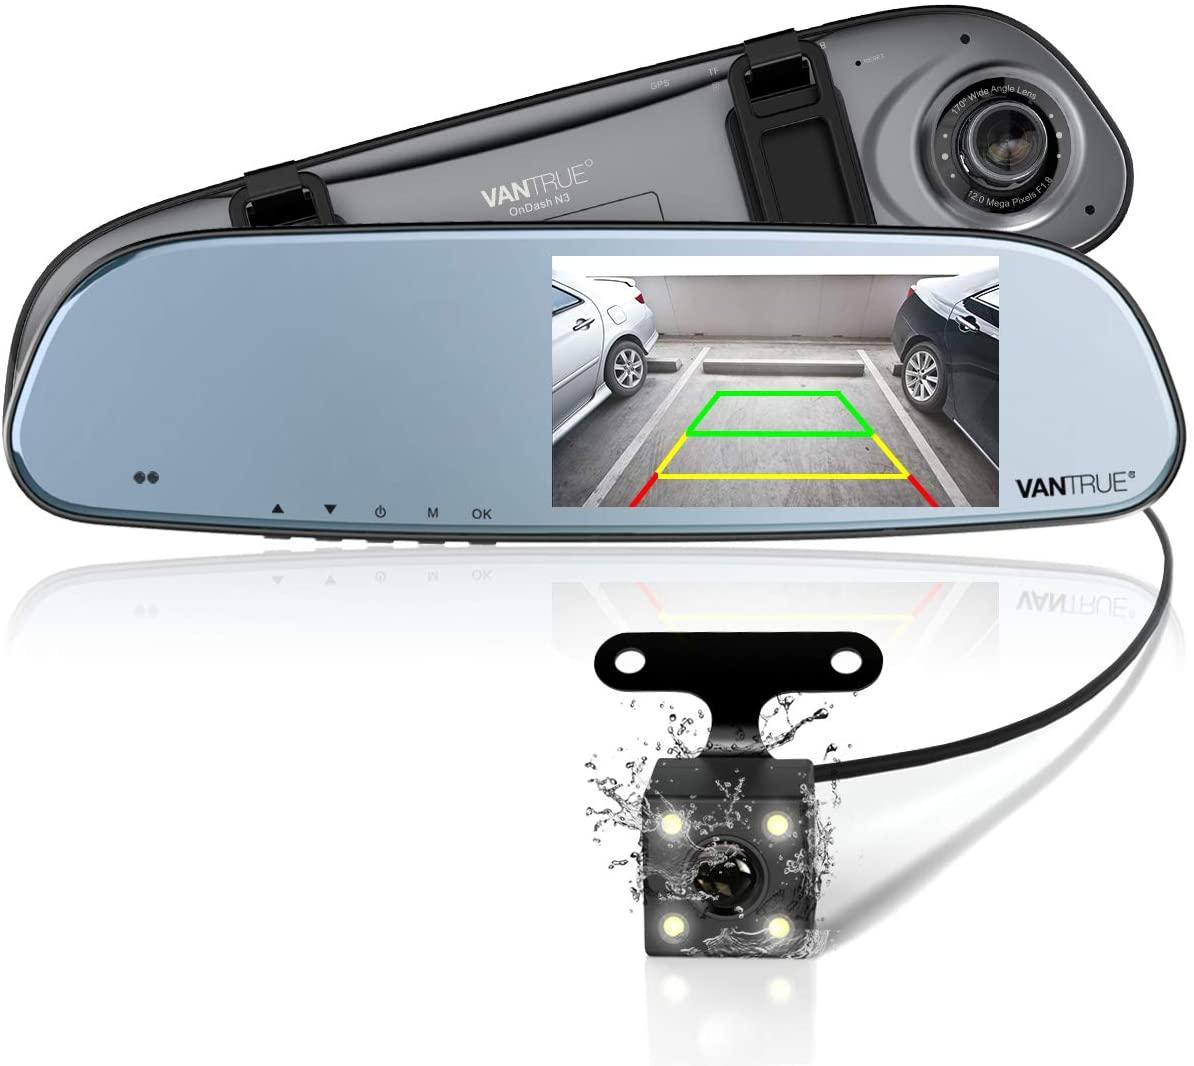 Multifunction rearview mirror can replace your clunky dashcam 